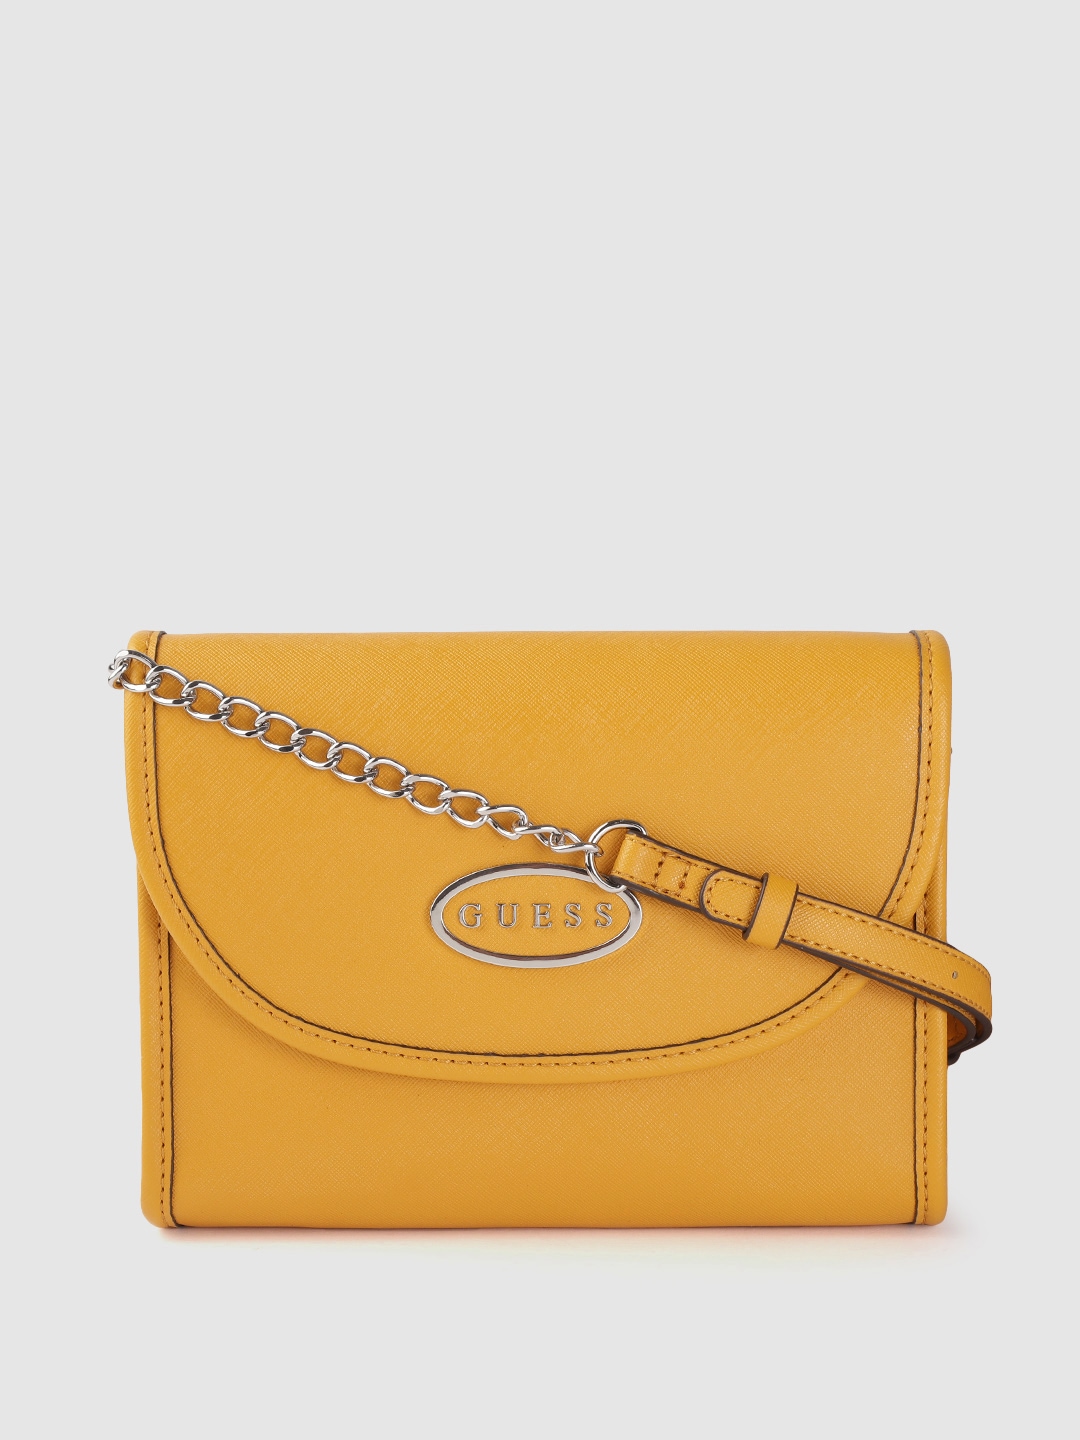 GUESS Women Mustard Yellow Solid Structured Sling Bag Price in India